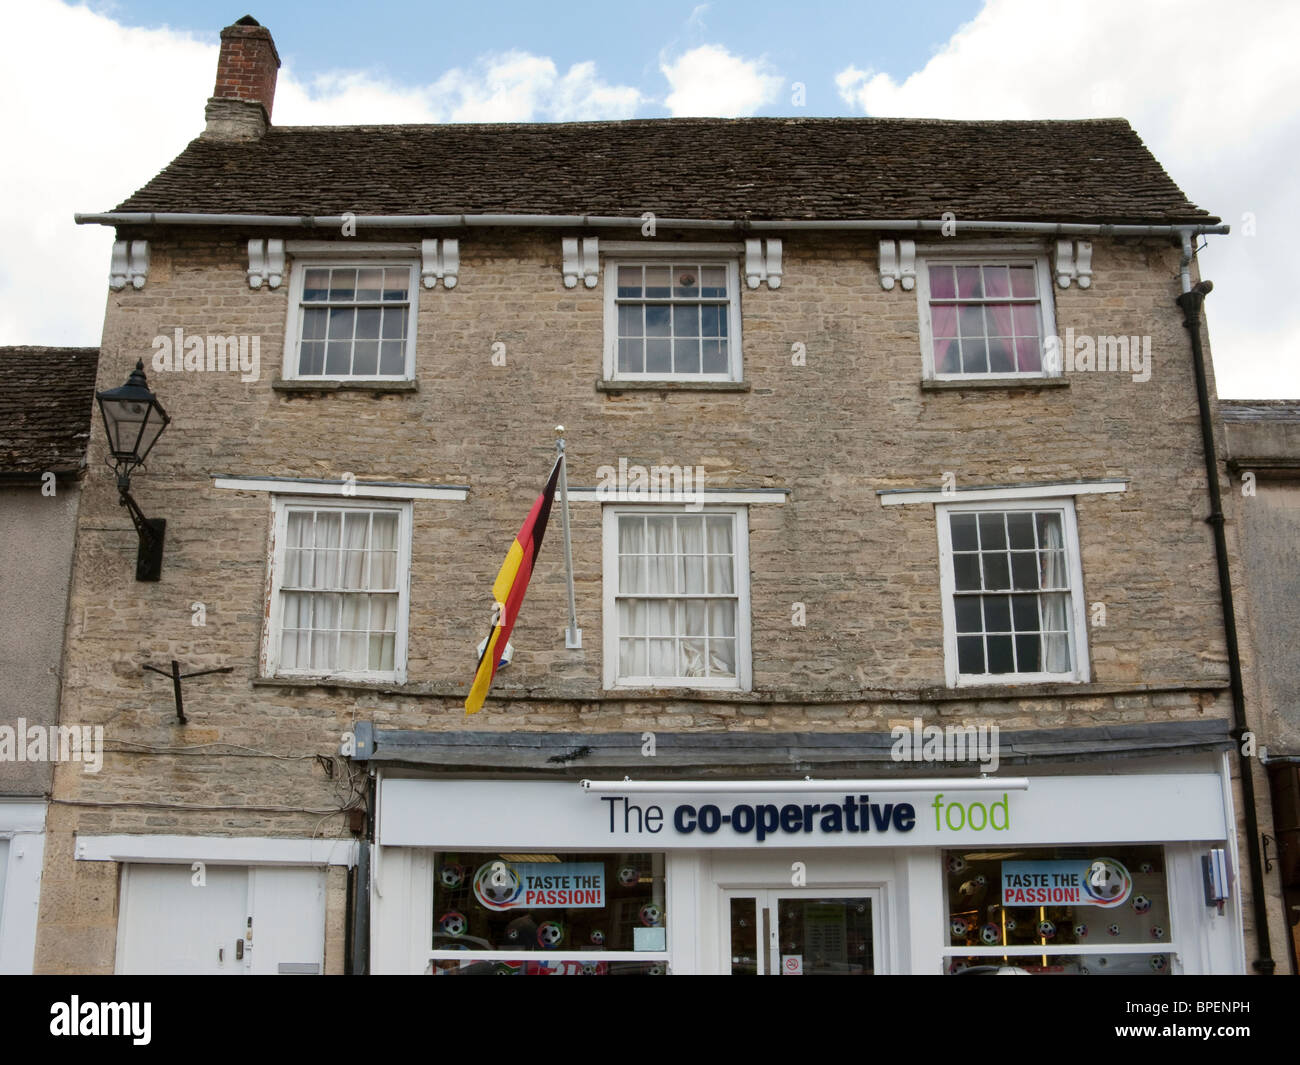 Co-operative food store in Fairford, Gloucestershire Englandminmart Stock Photo